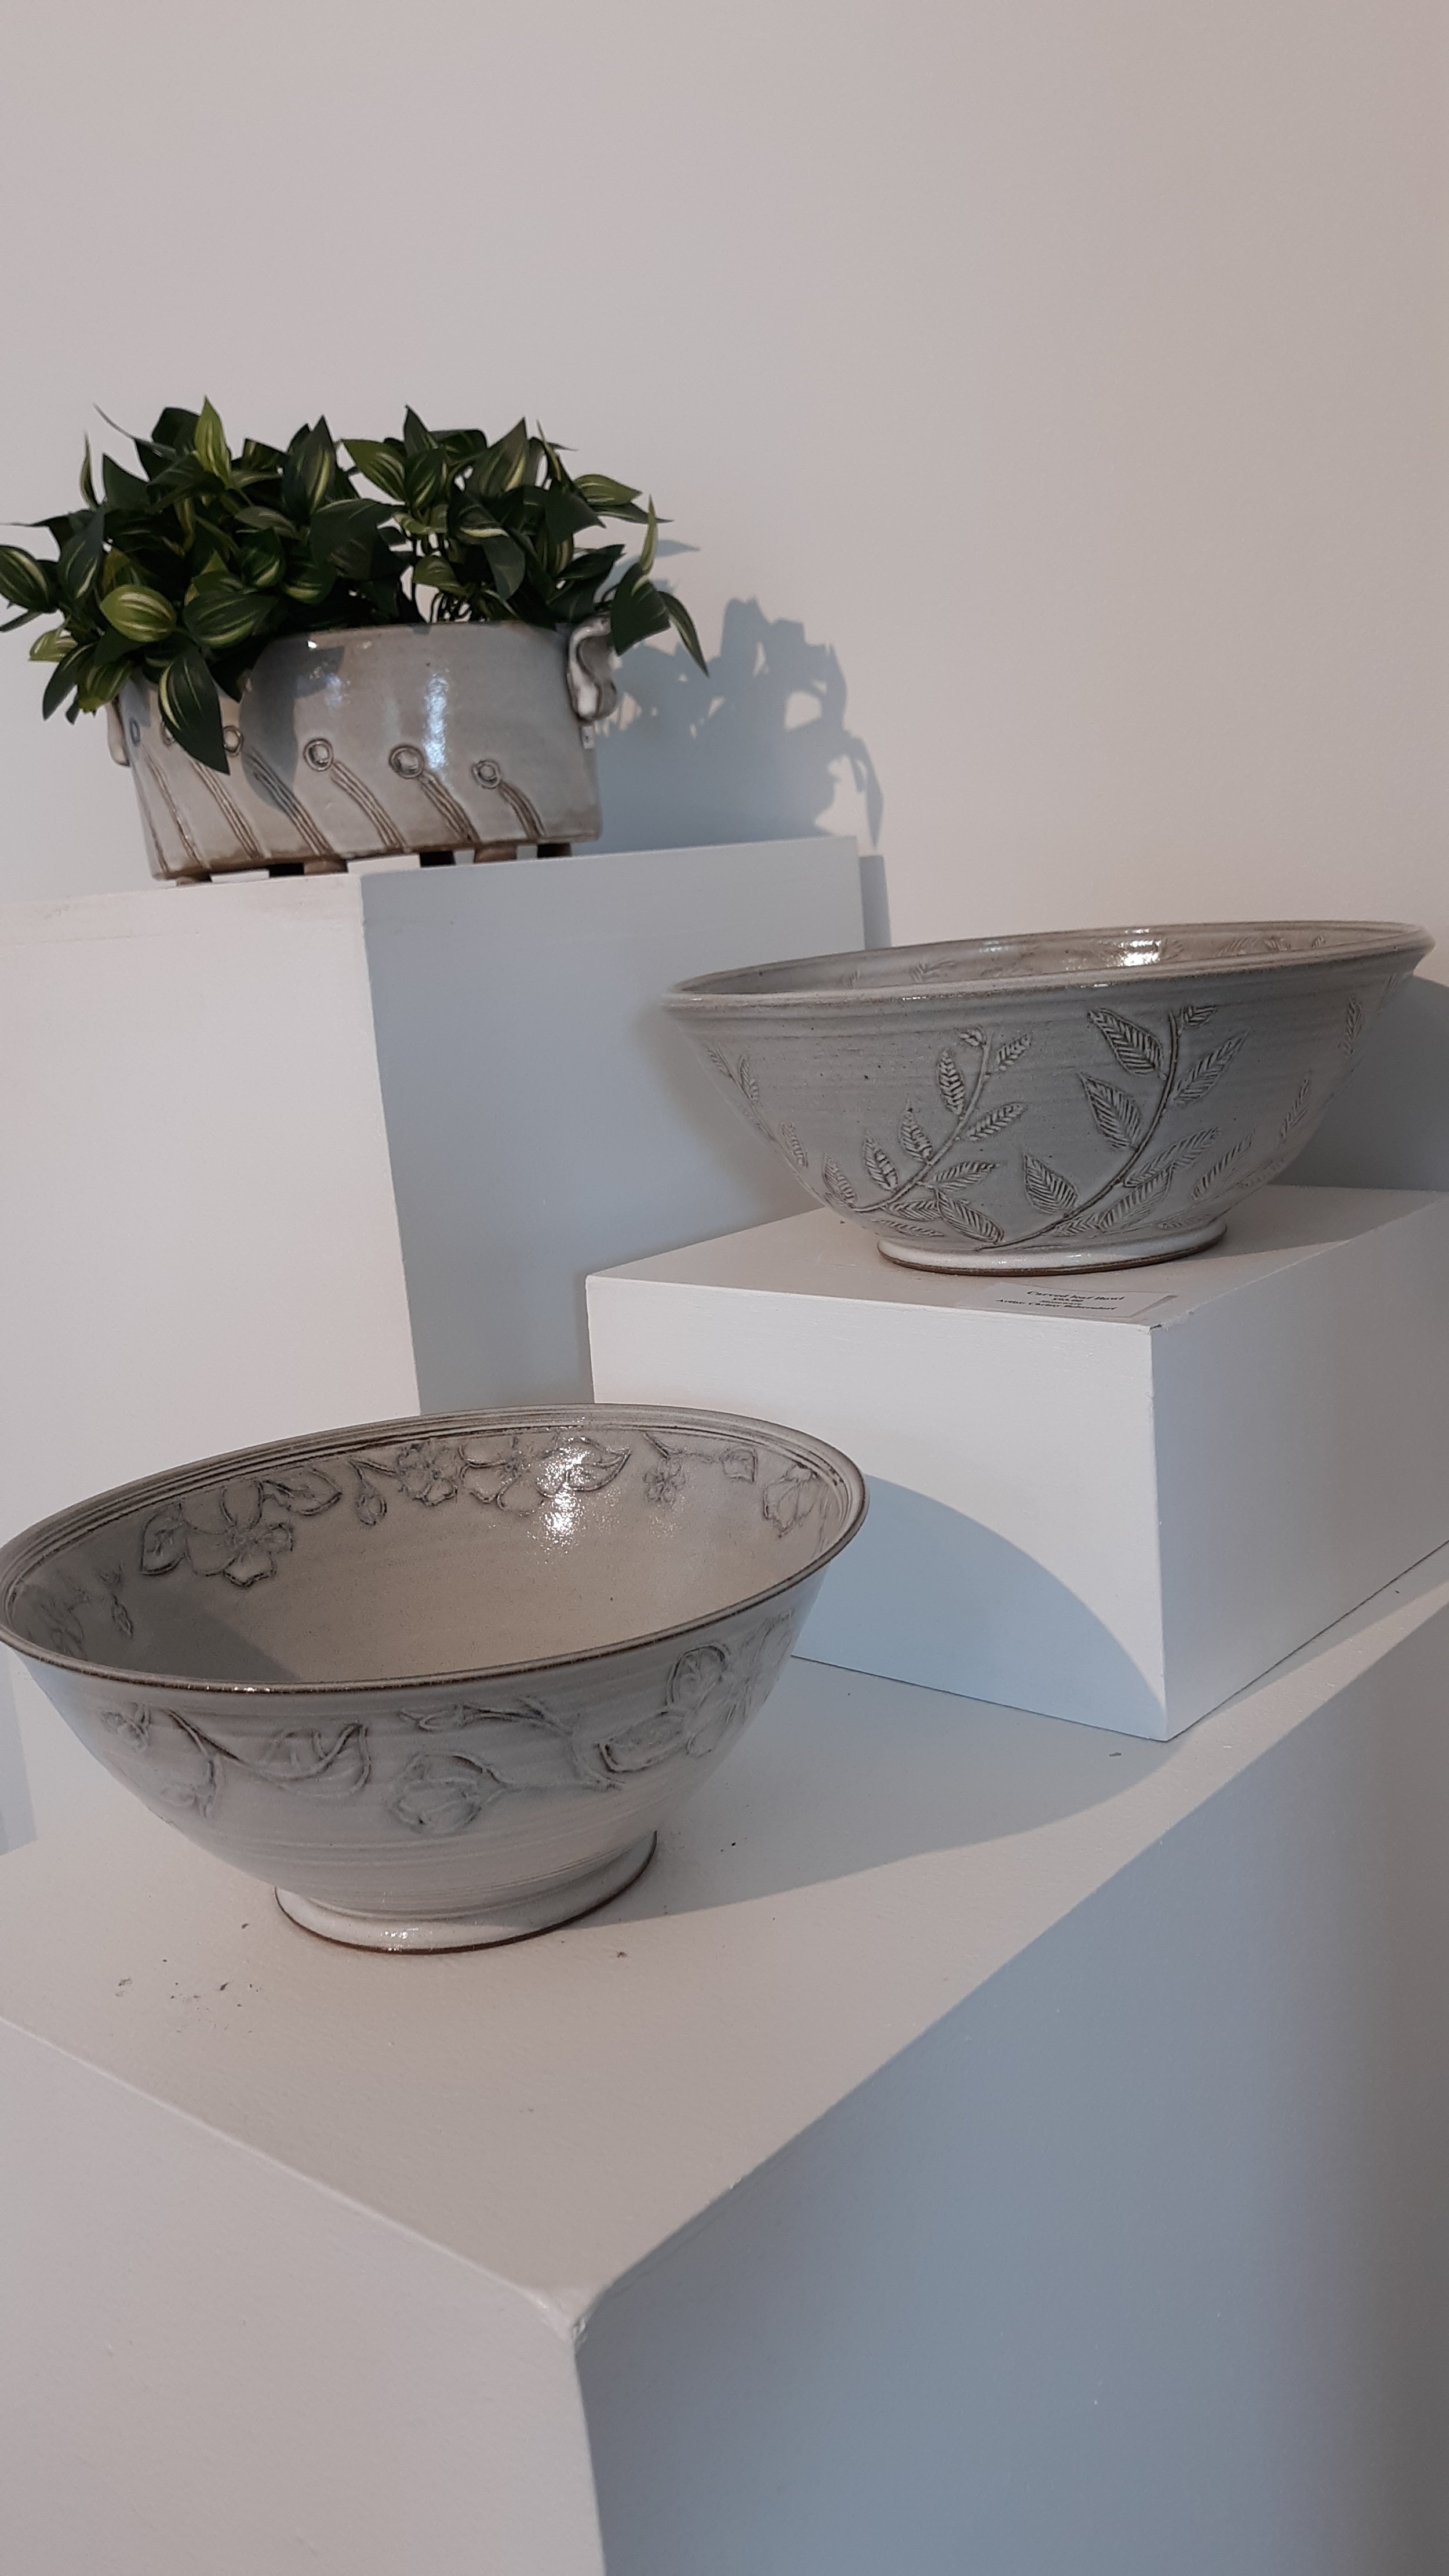 Carved Bowls and Planter